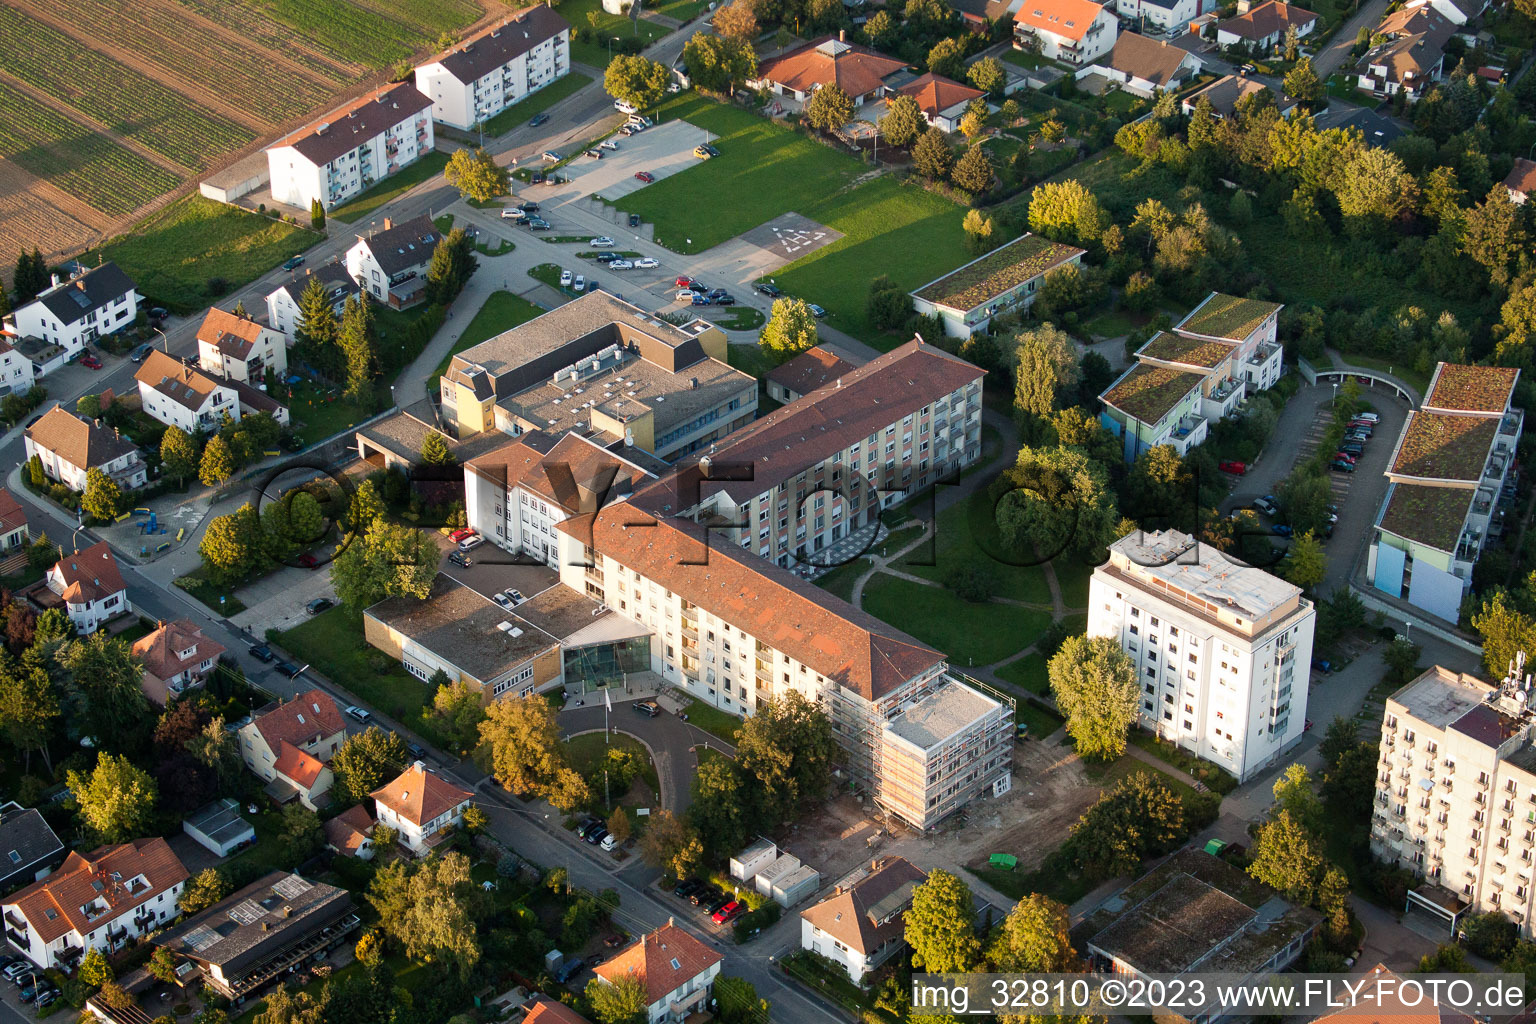 Aerial photograpy of Hospital in Kandel in the state Rhineland-Palatinate, Germany